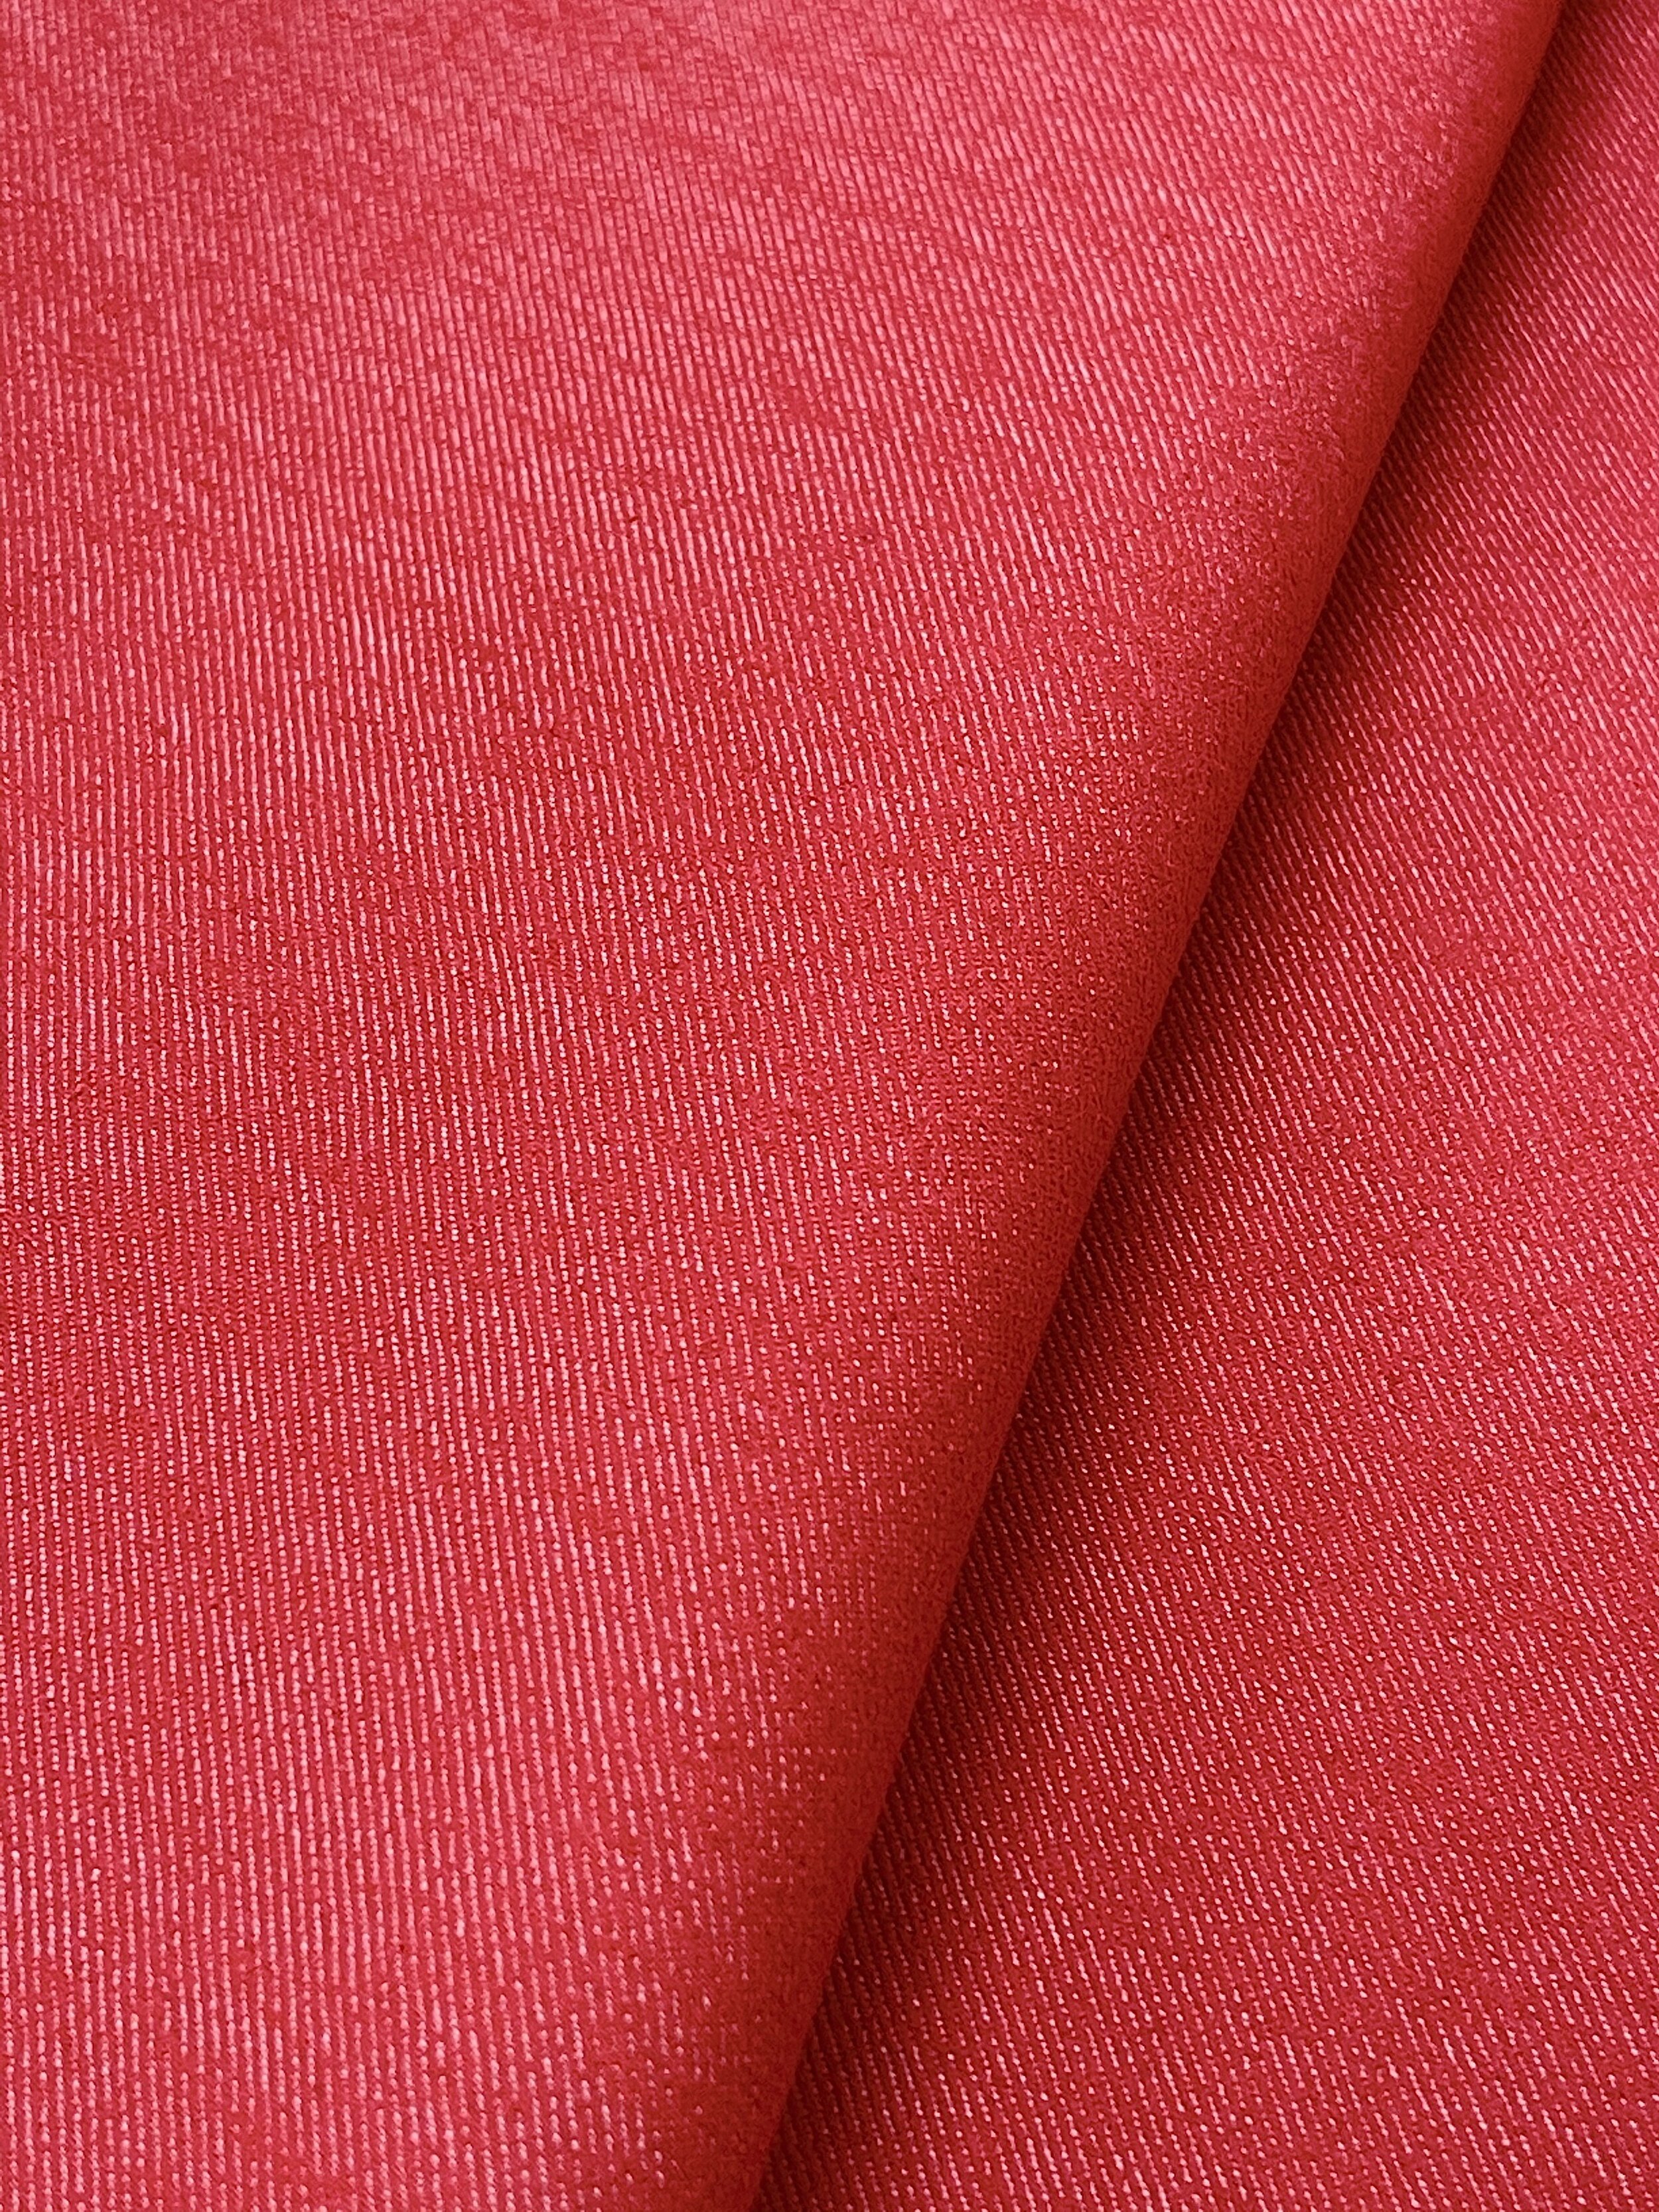 Denim Fabric by The Metre Stretch Colorful Cotton Denim Fabric 150cm Wide  Sold by The Meter for Jeans Skirt Clothing HandmadeColorBig red   Amazoncomau Home